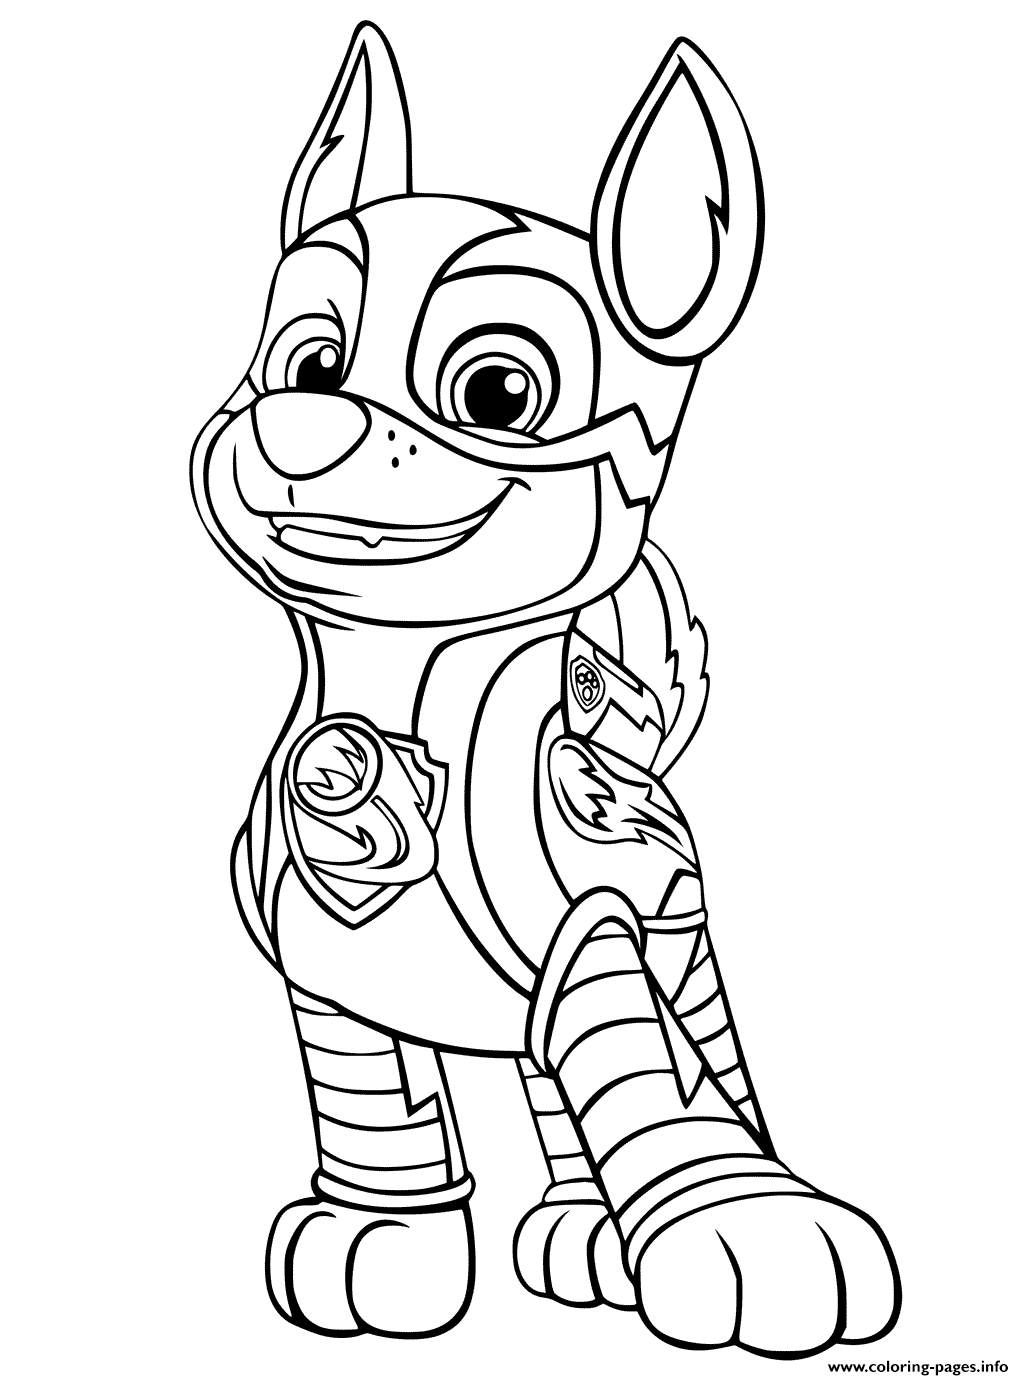 Paw Patrol Coloring Pages FREE Printable 134